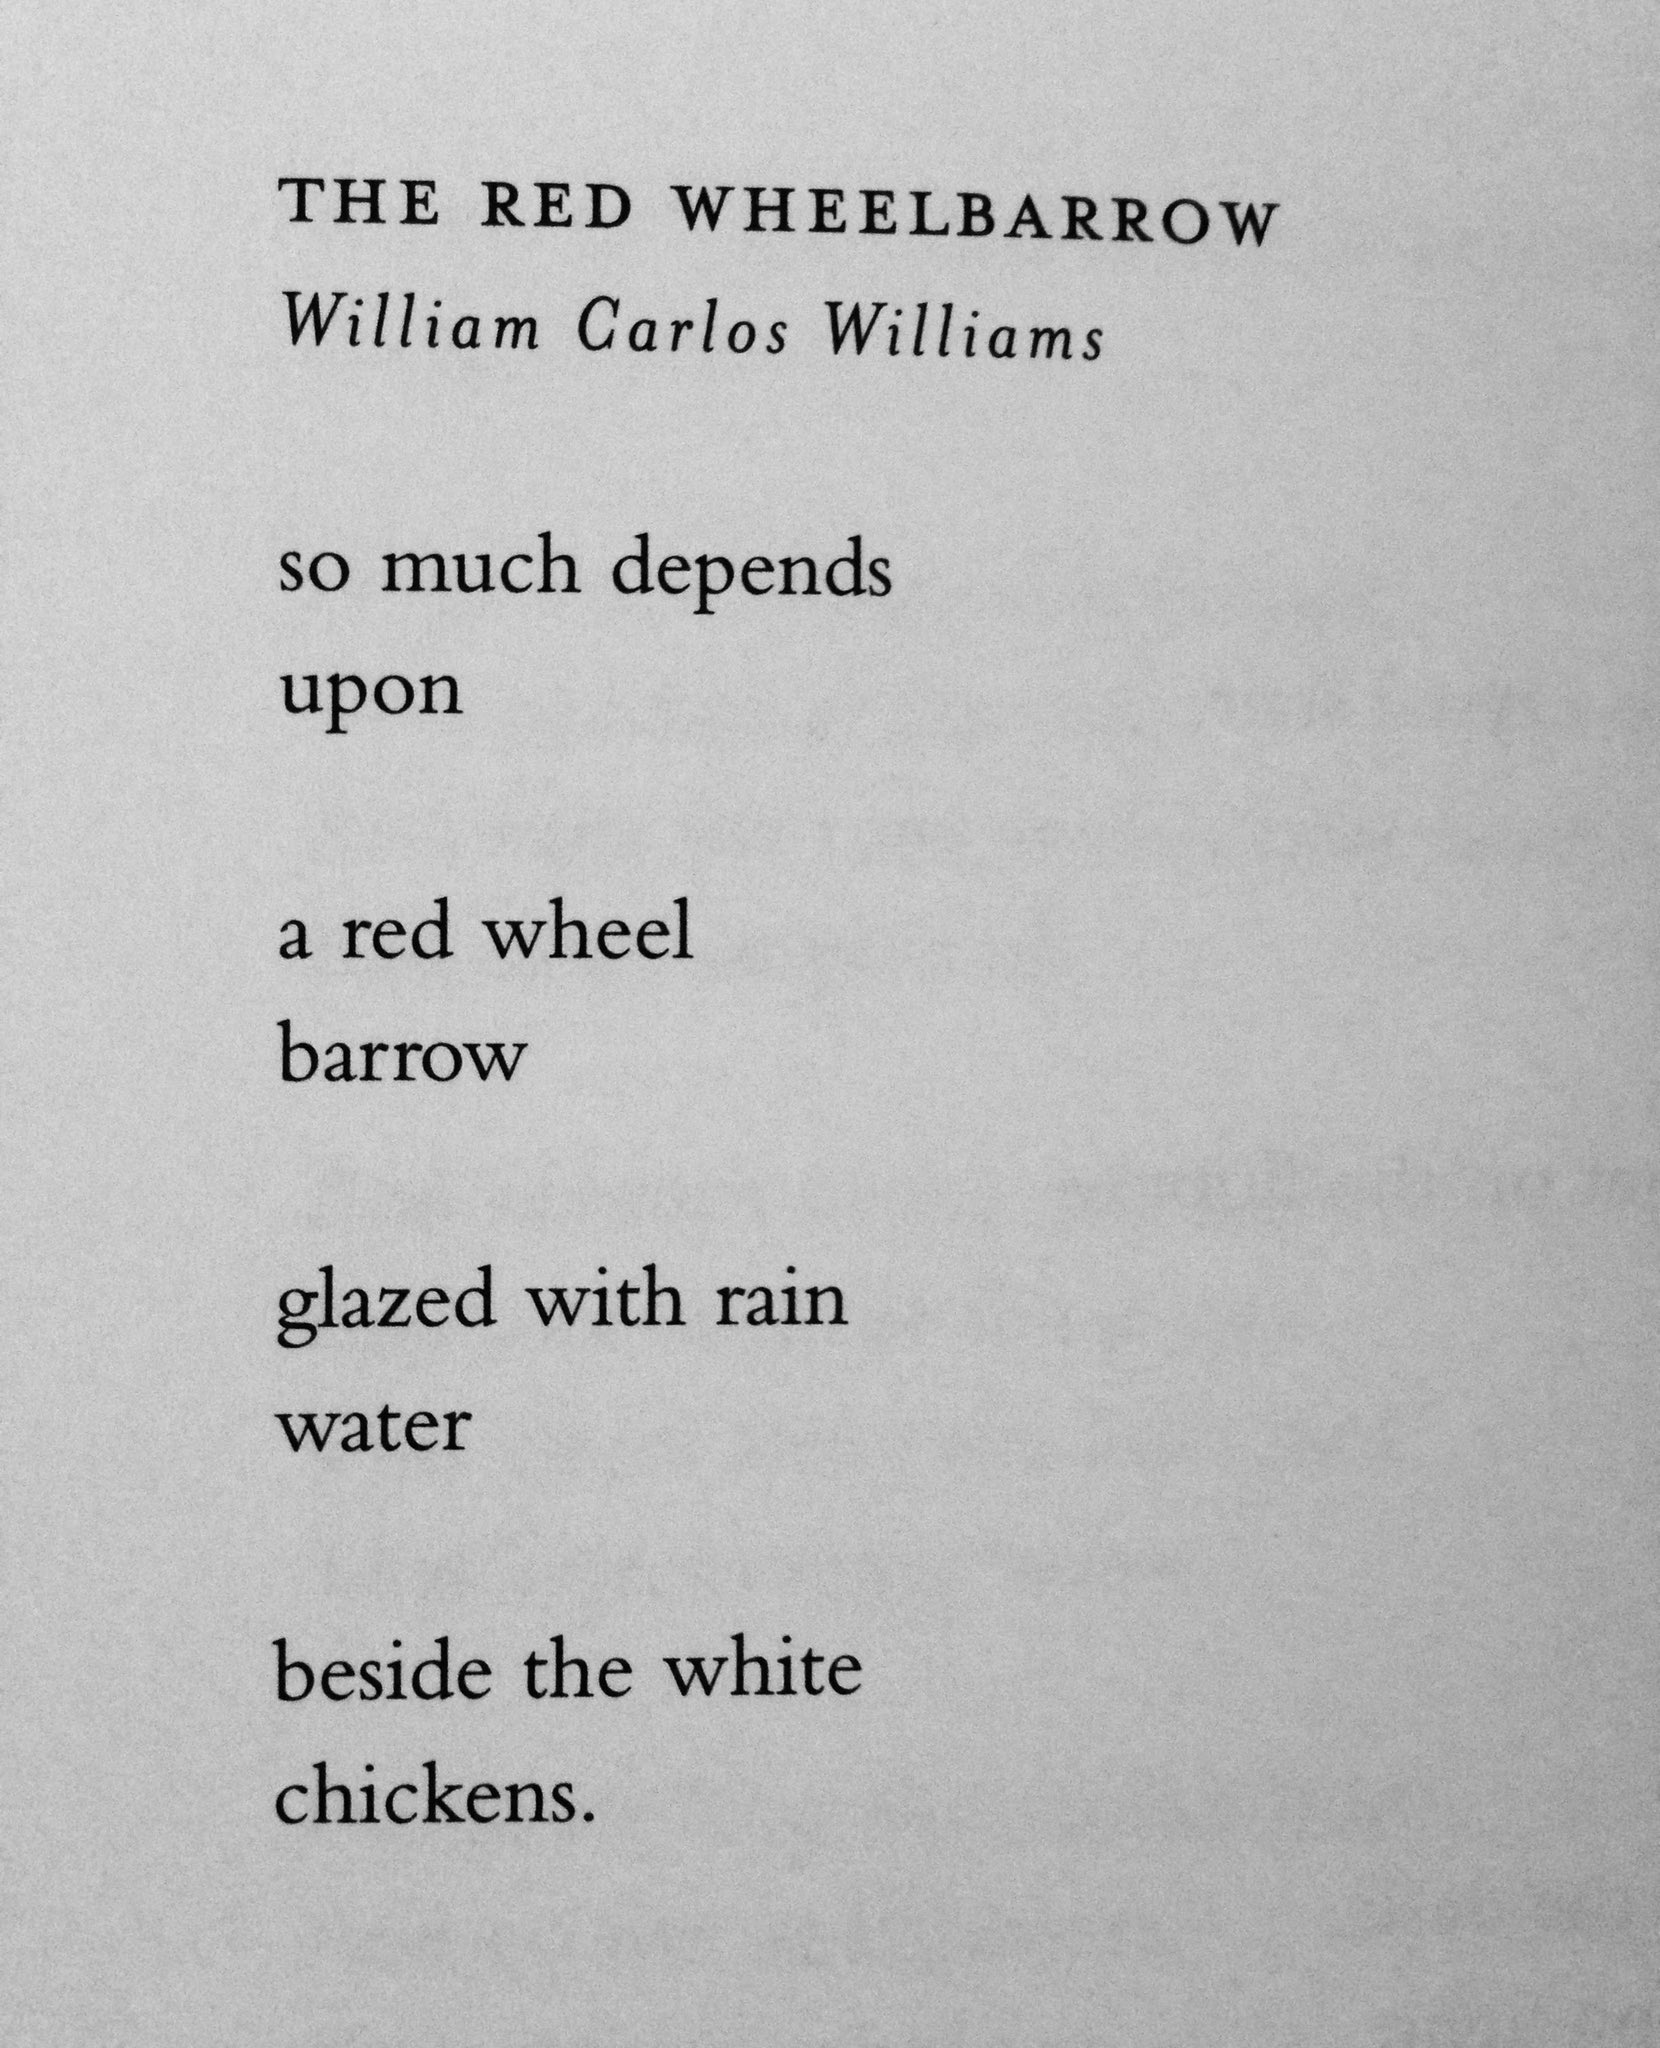 Nikita Twitter: "This William Carlos Williams poem and Mary Ruefle's hilarious response poem. https://t.co/bGh88BEkgQ" / X